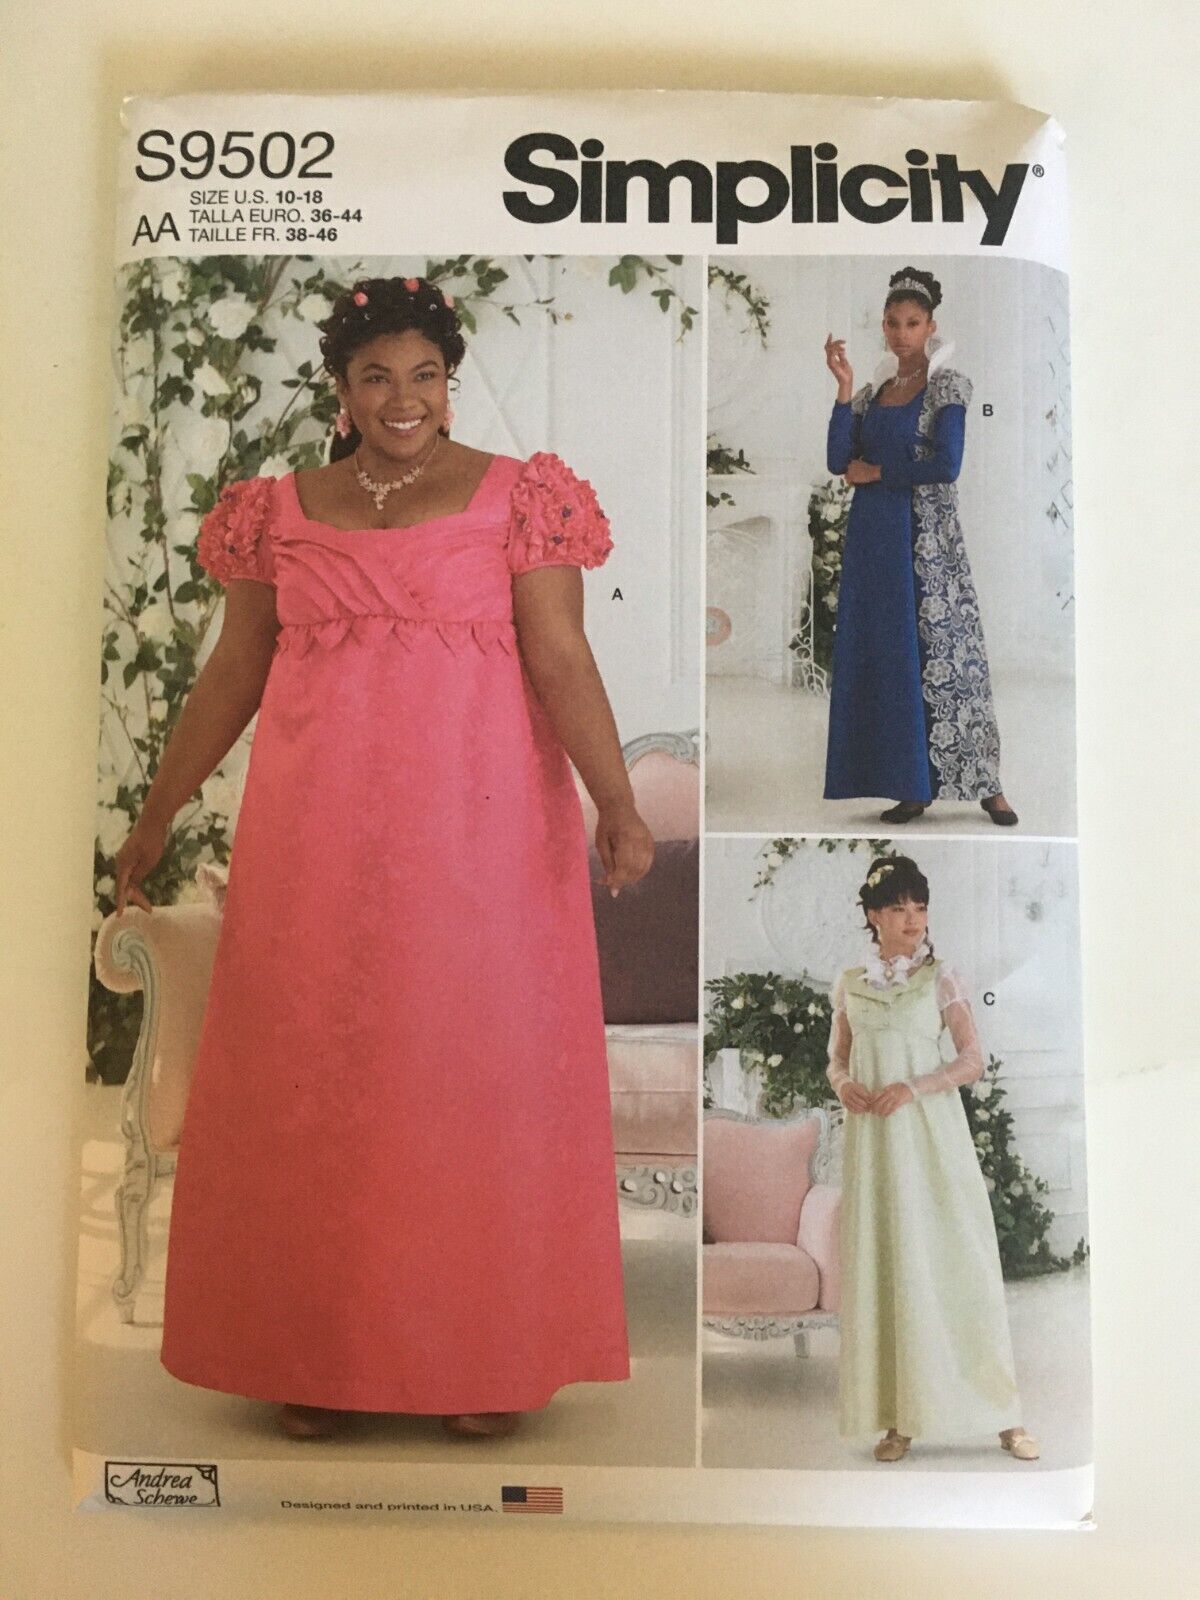 Primary image for Simplicity Sewing Pattern S9502 Misses Halloween Costume Gown Dress Sz 10-18 UC